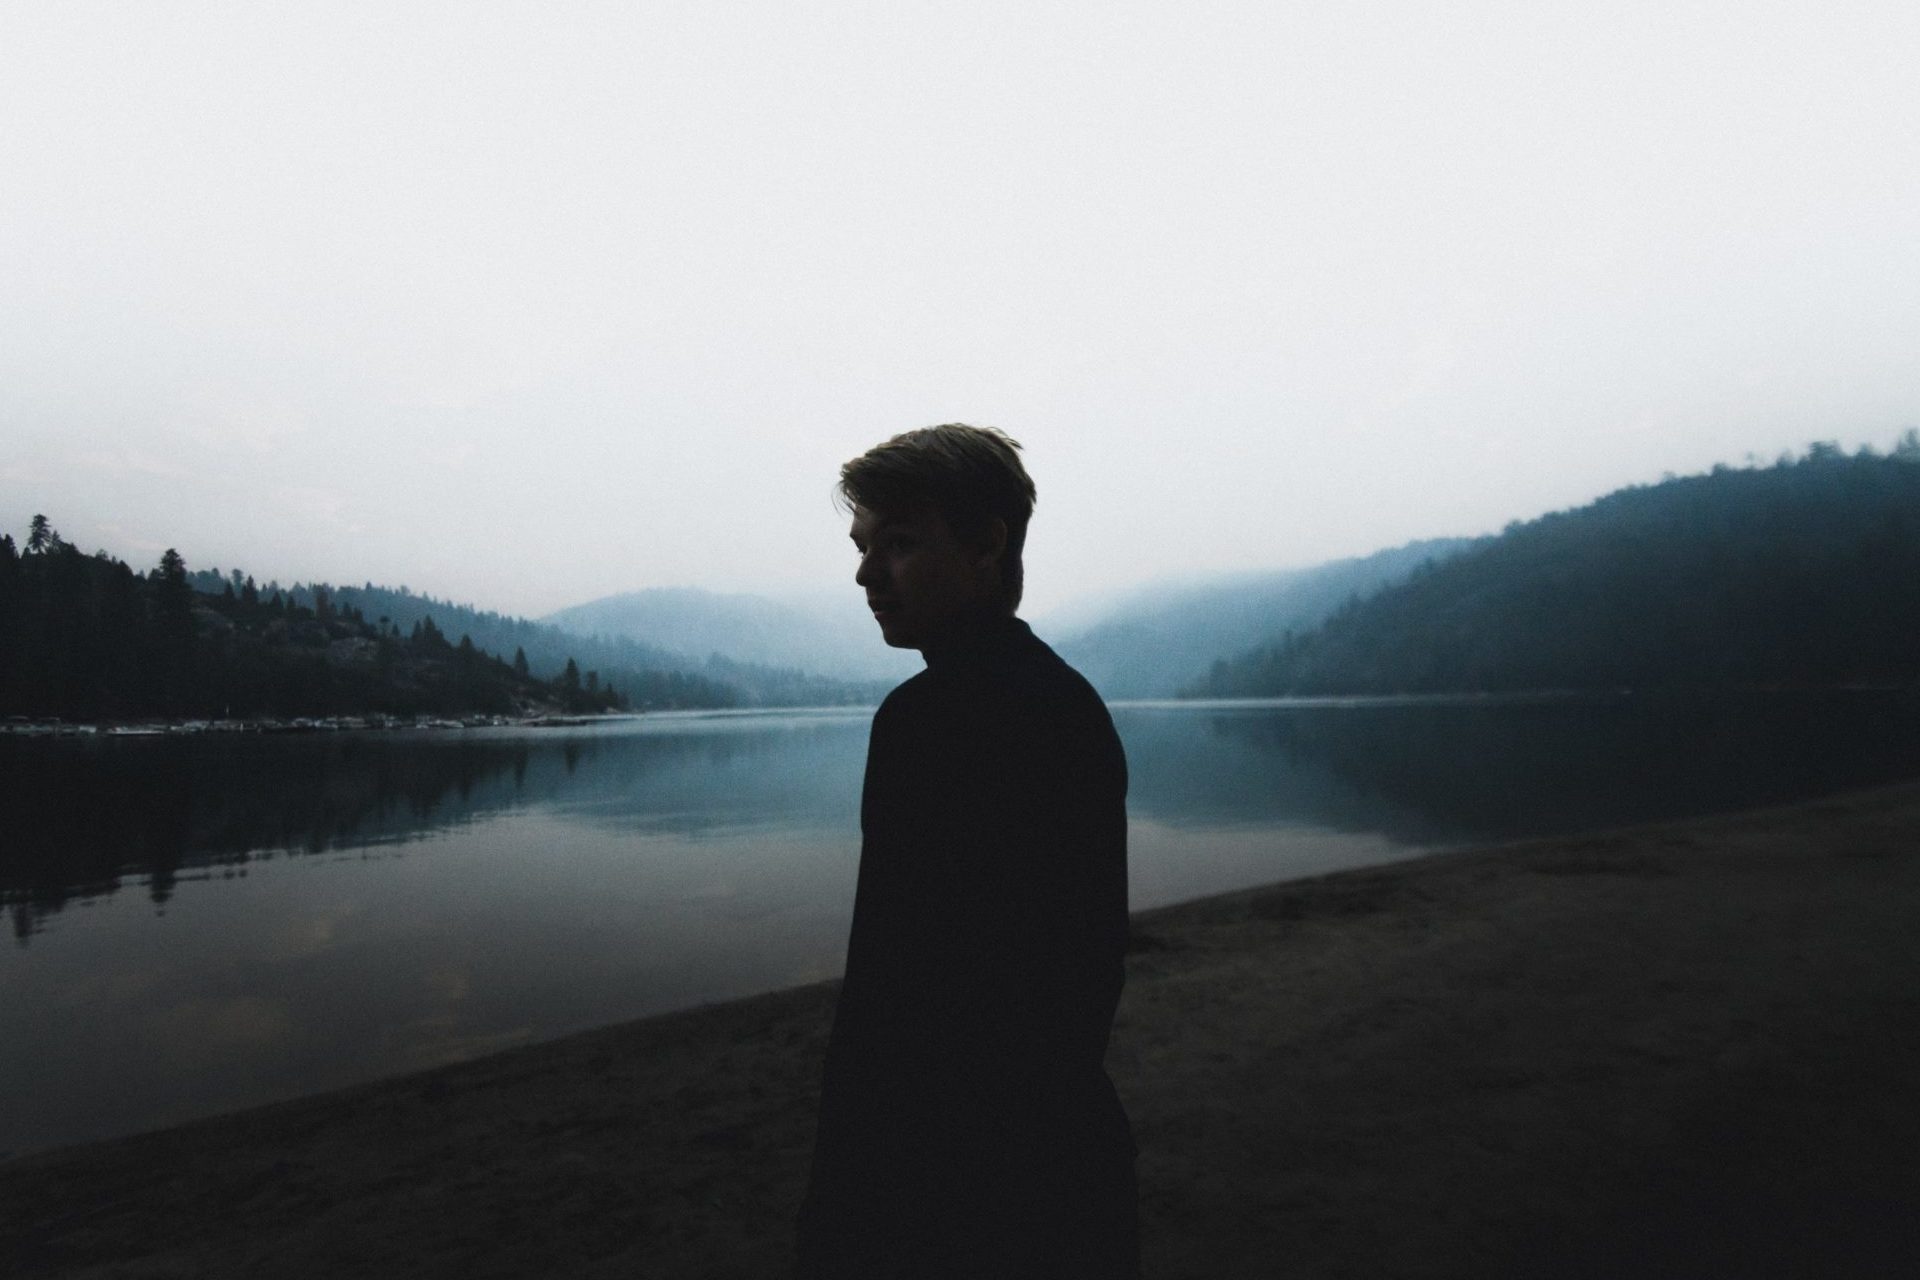 Silhouette of a man standing by a lake